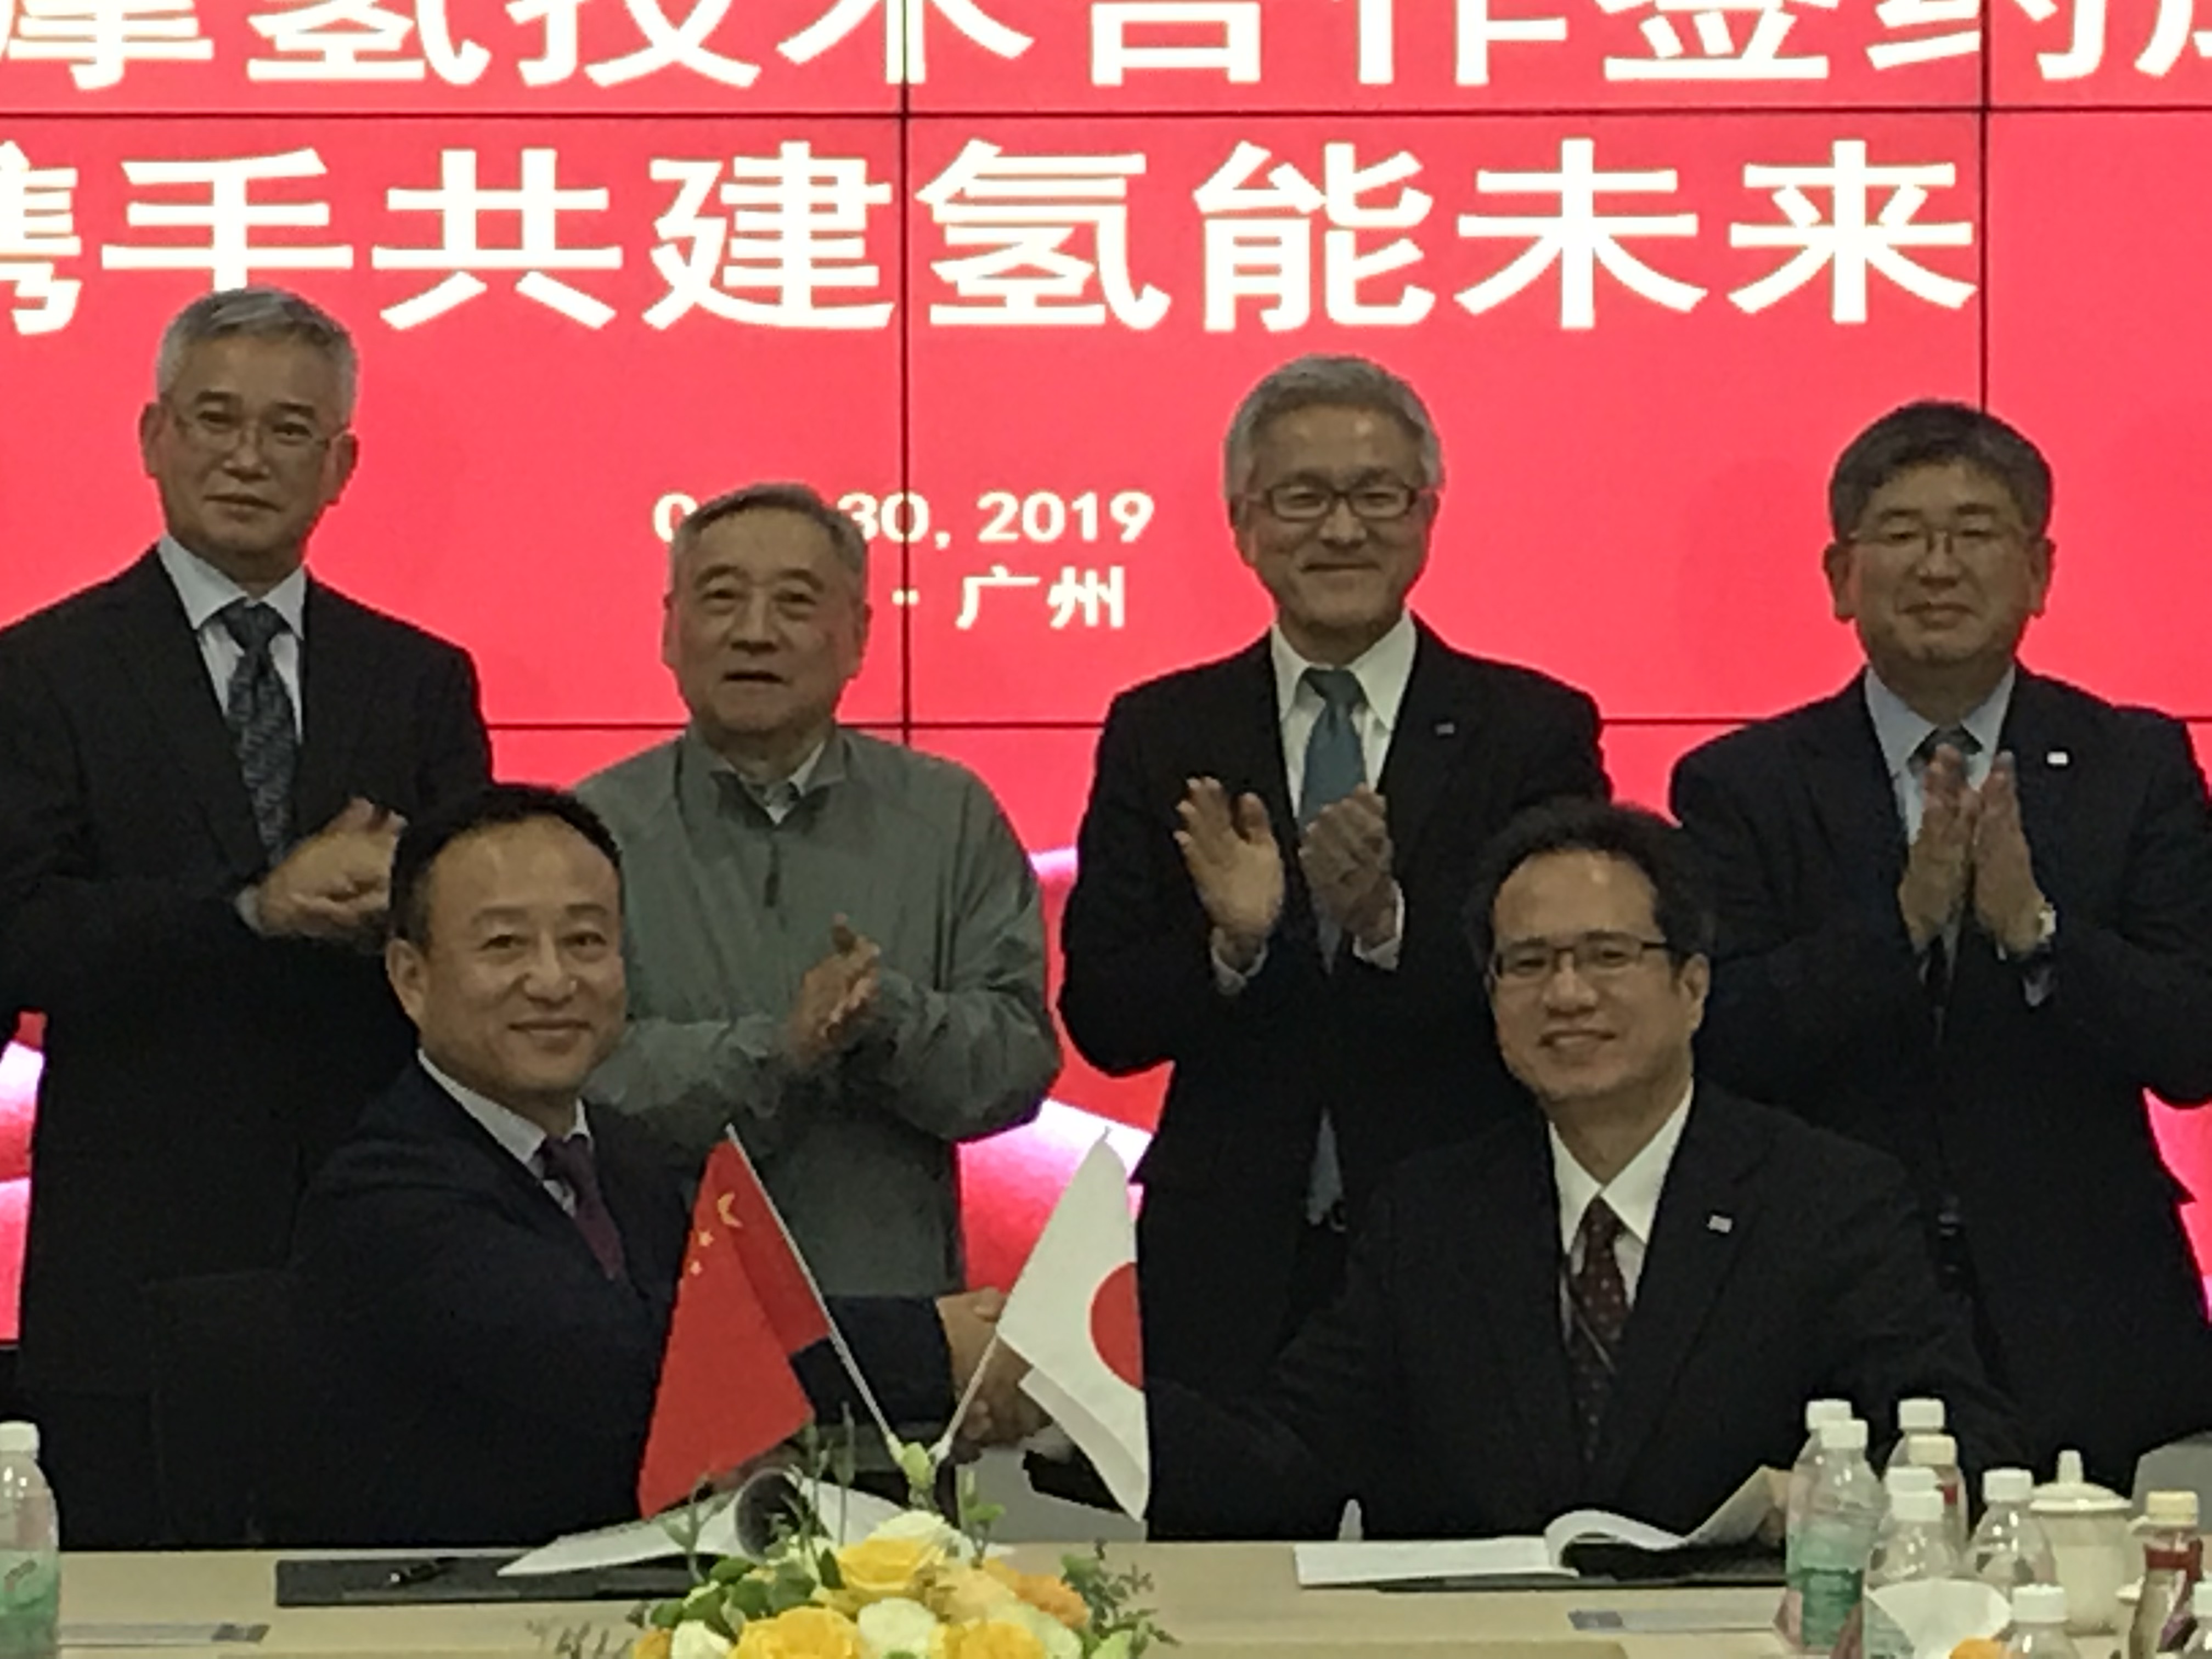 From left to right in the front row, Ge Wang, Chairman of MOH, Yoshihisa Sanagi, General Manager of the Hydrogen Energy Business Division, Toshiba ESS, Second from left in the back row, Xu Dingming, Counsellor of The State Council, Chairman of National Energy Expert Consulting Committee, People’s Republic of China and Corporate adviser of MOH, third from left in the back row, Mamoru Hatazawa, President of Toshiba ESS　